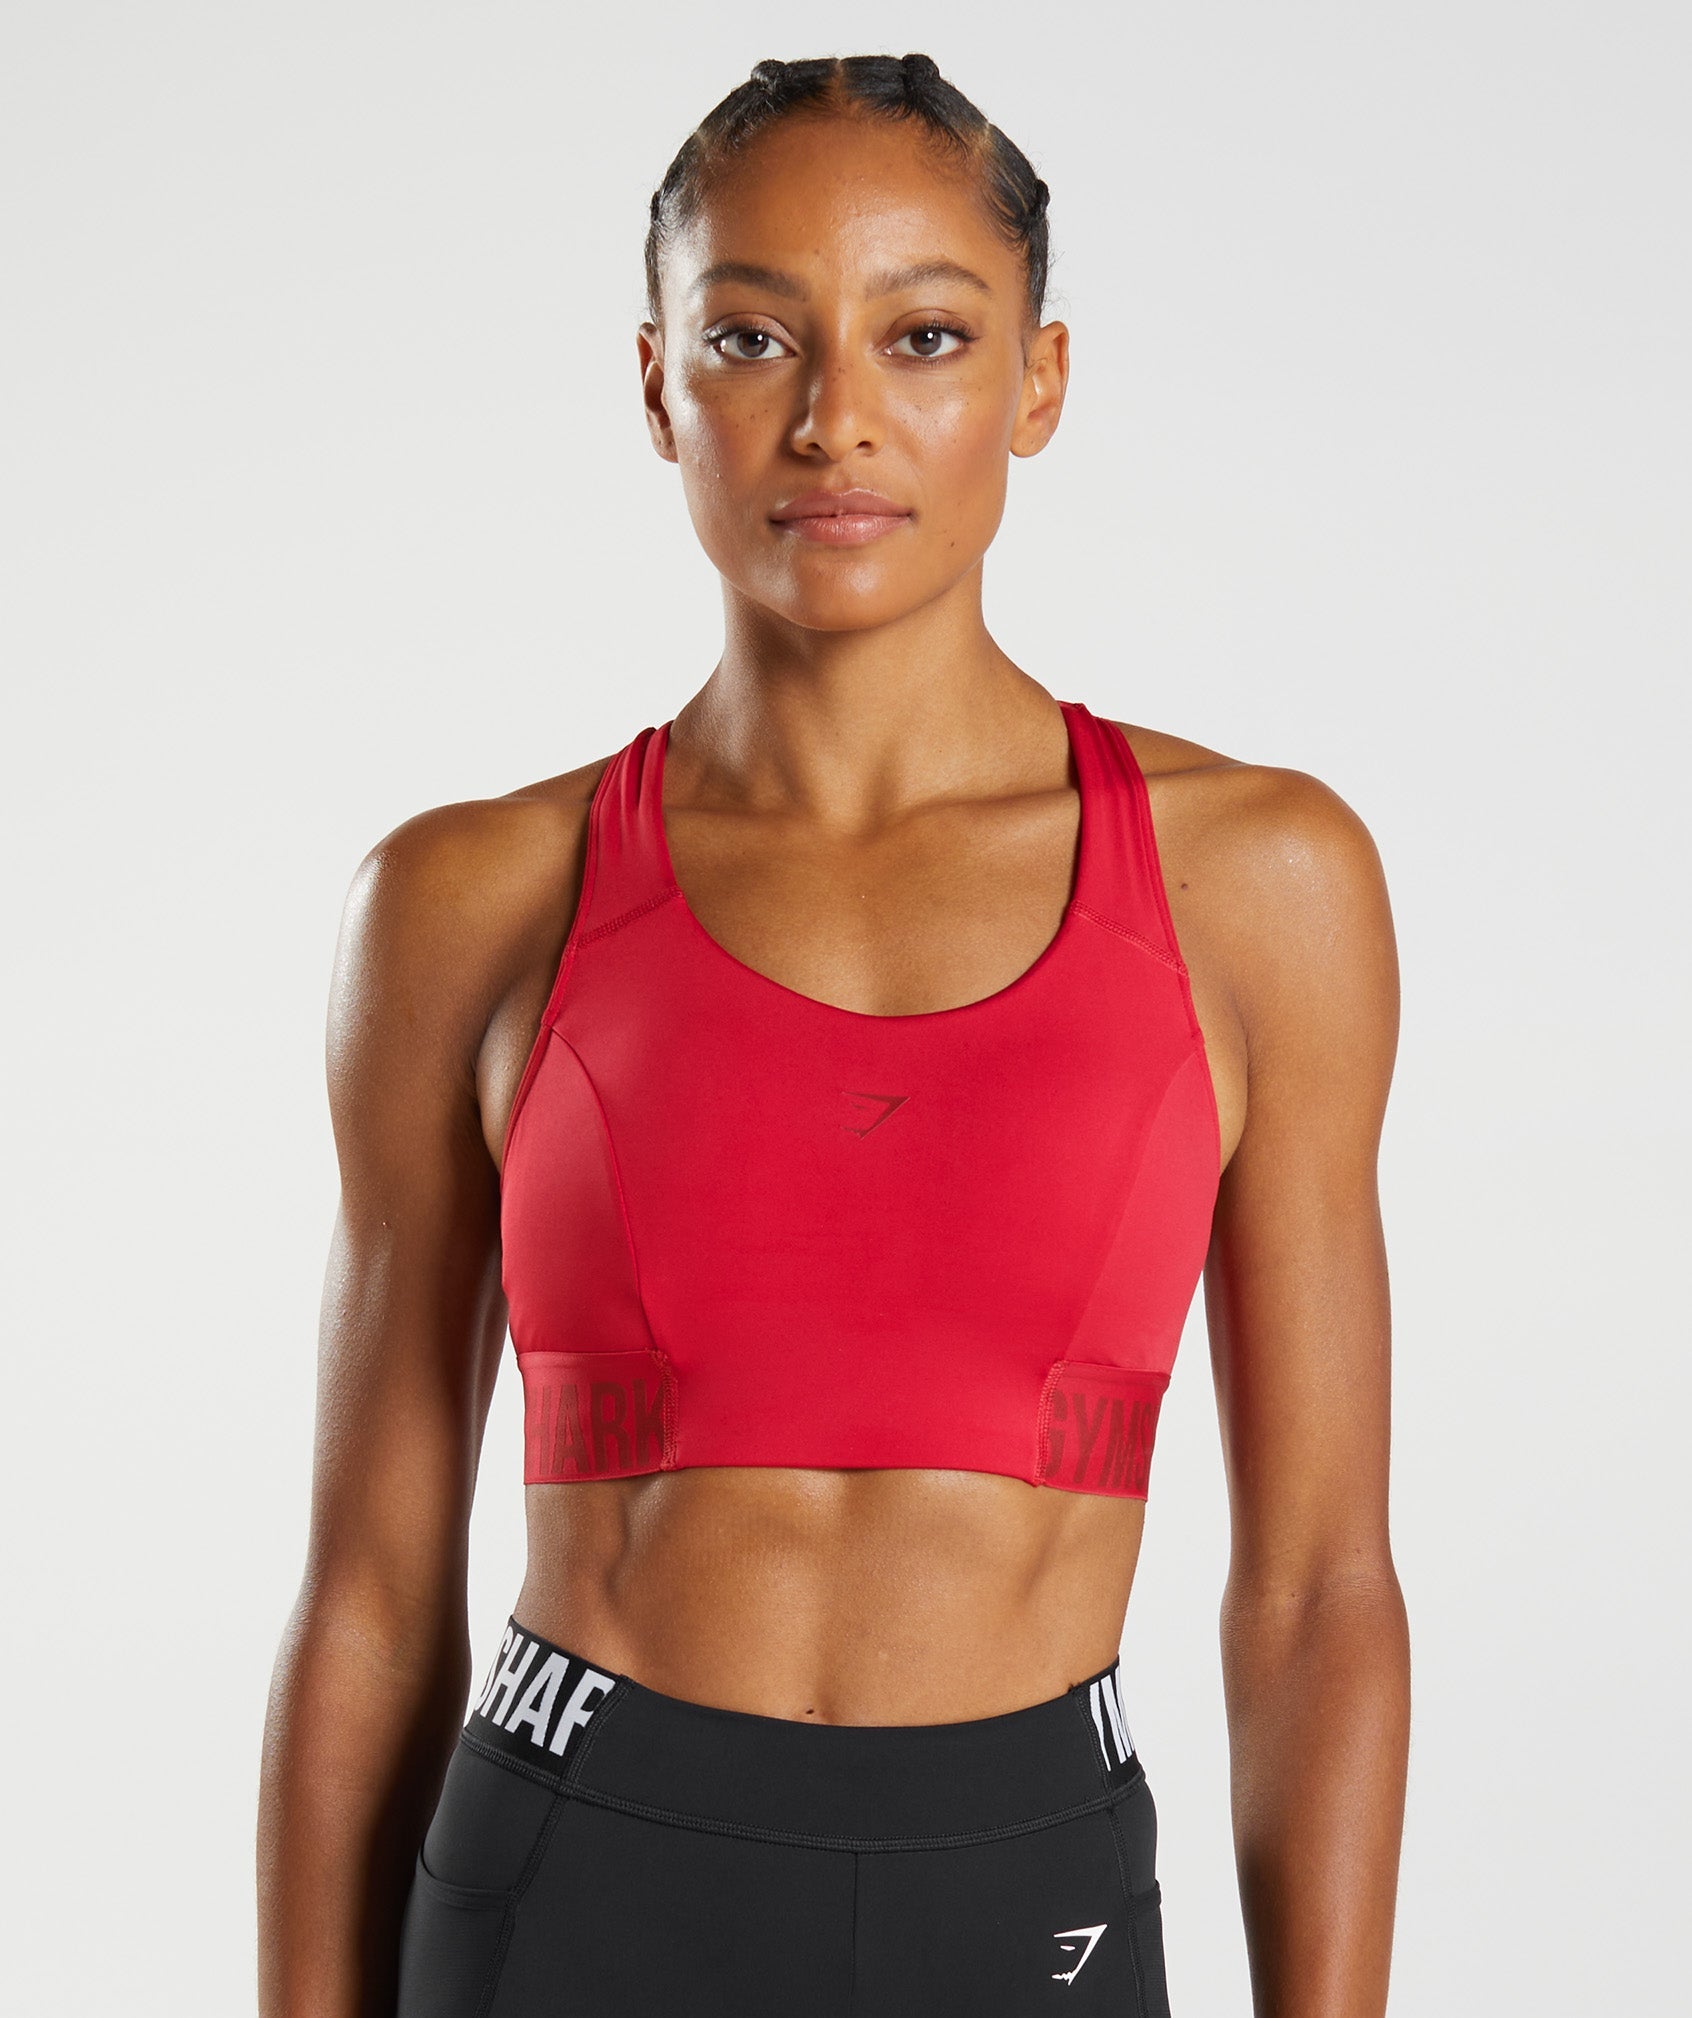 Women's Featured - Compression Fit Sport Bras in Red for Training